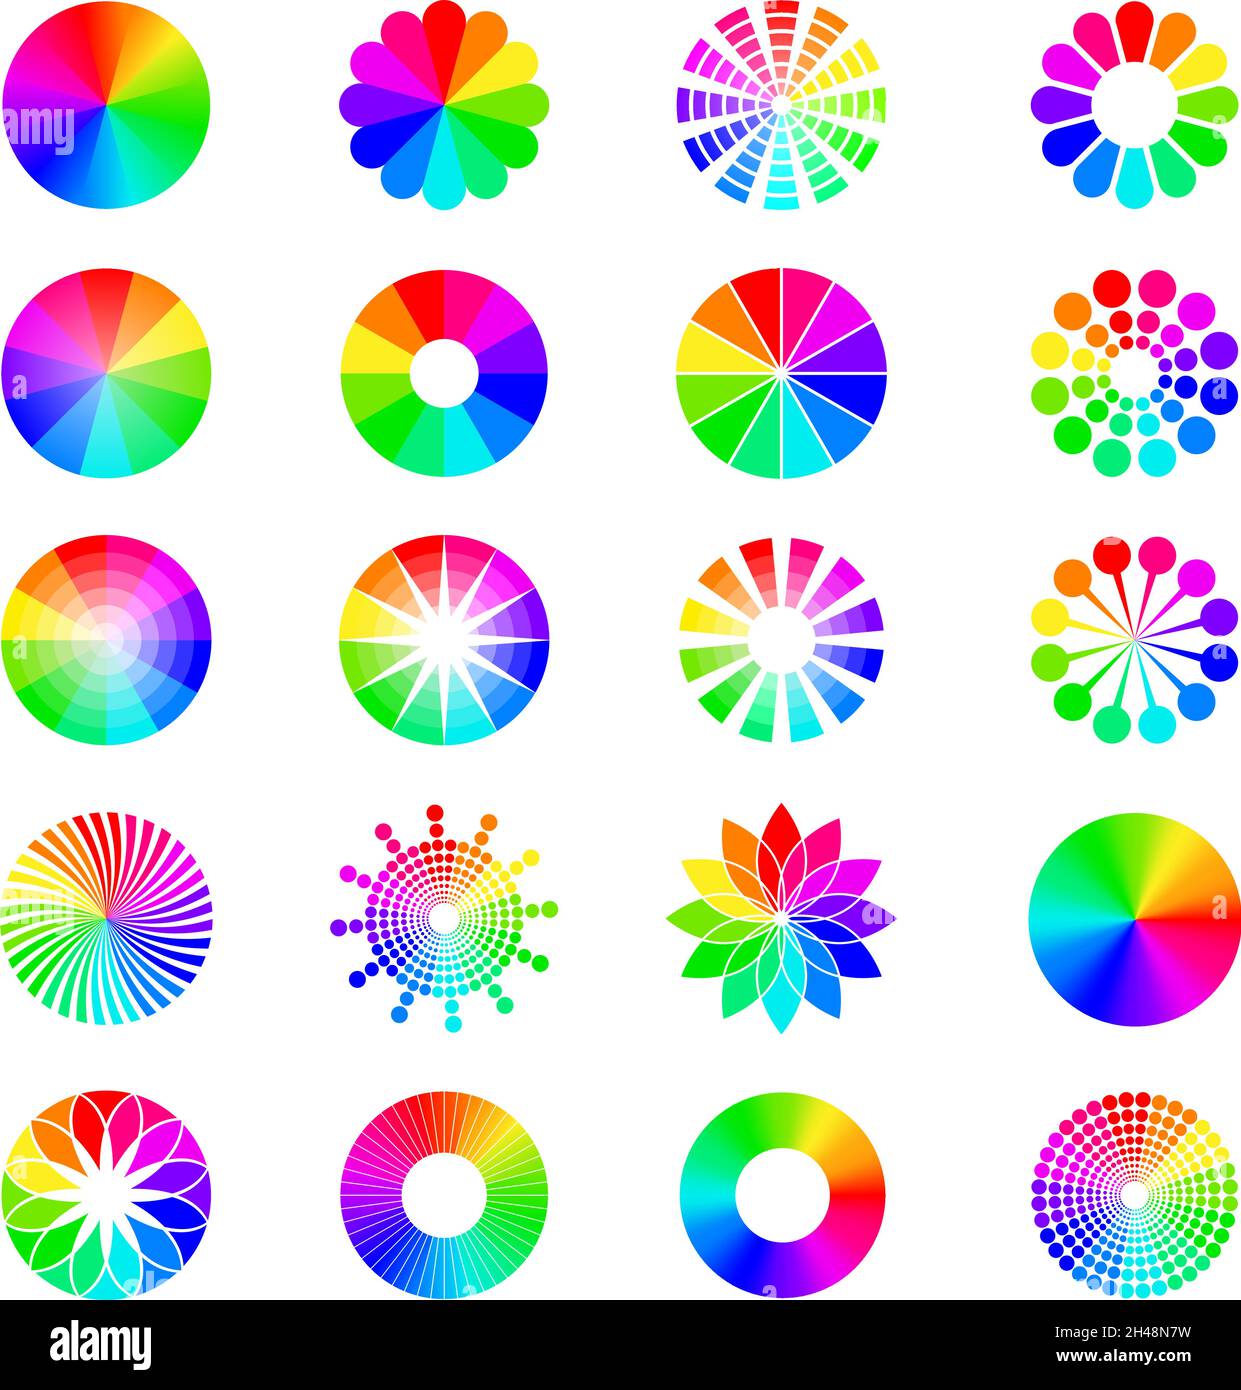 Rgb shapes. Round selective wheels colored circles spectrum waves pallets recent vector illustrations set Stock Vector